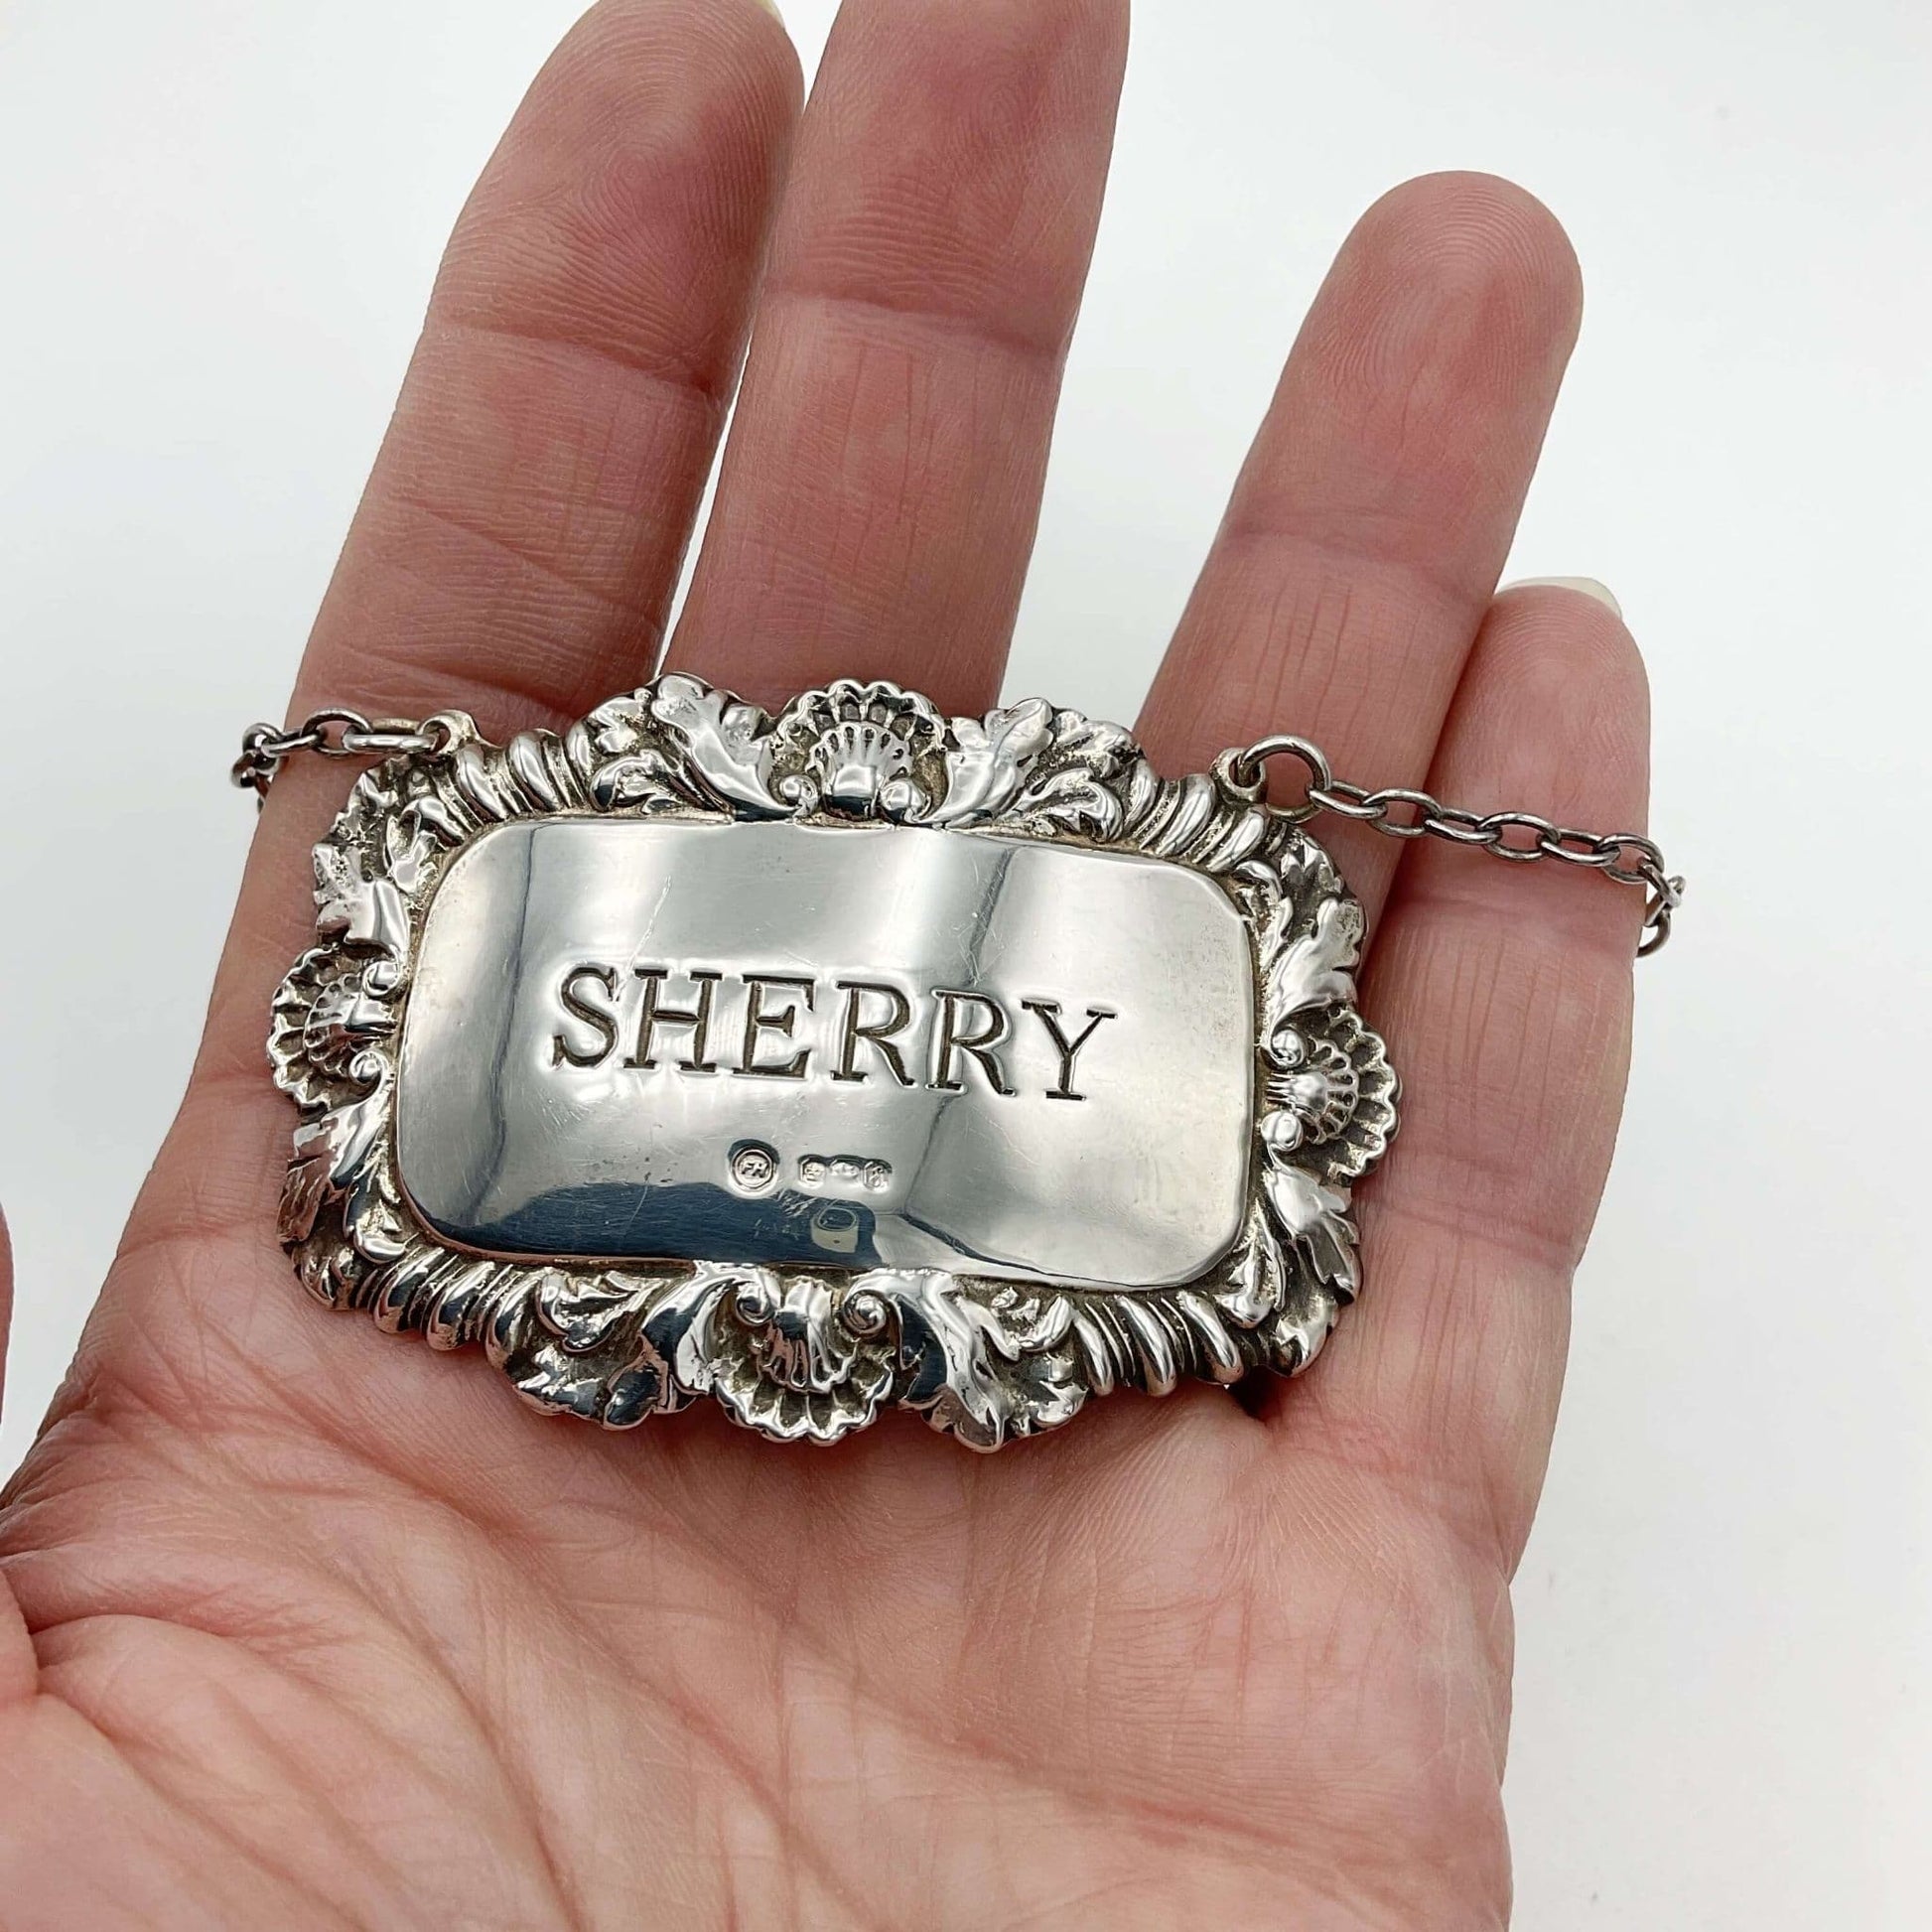 Ornate silver decanter label with Sherry engraved in the centre held in a hand